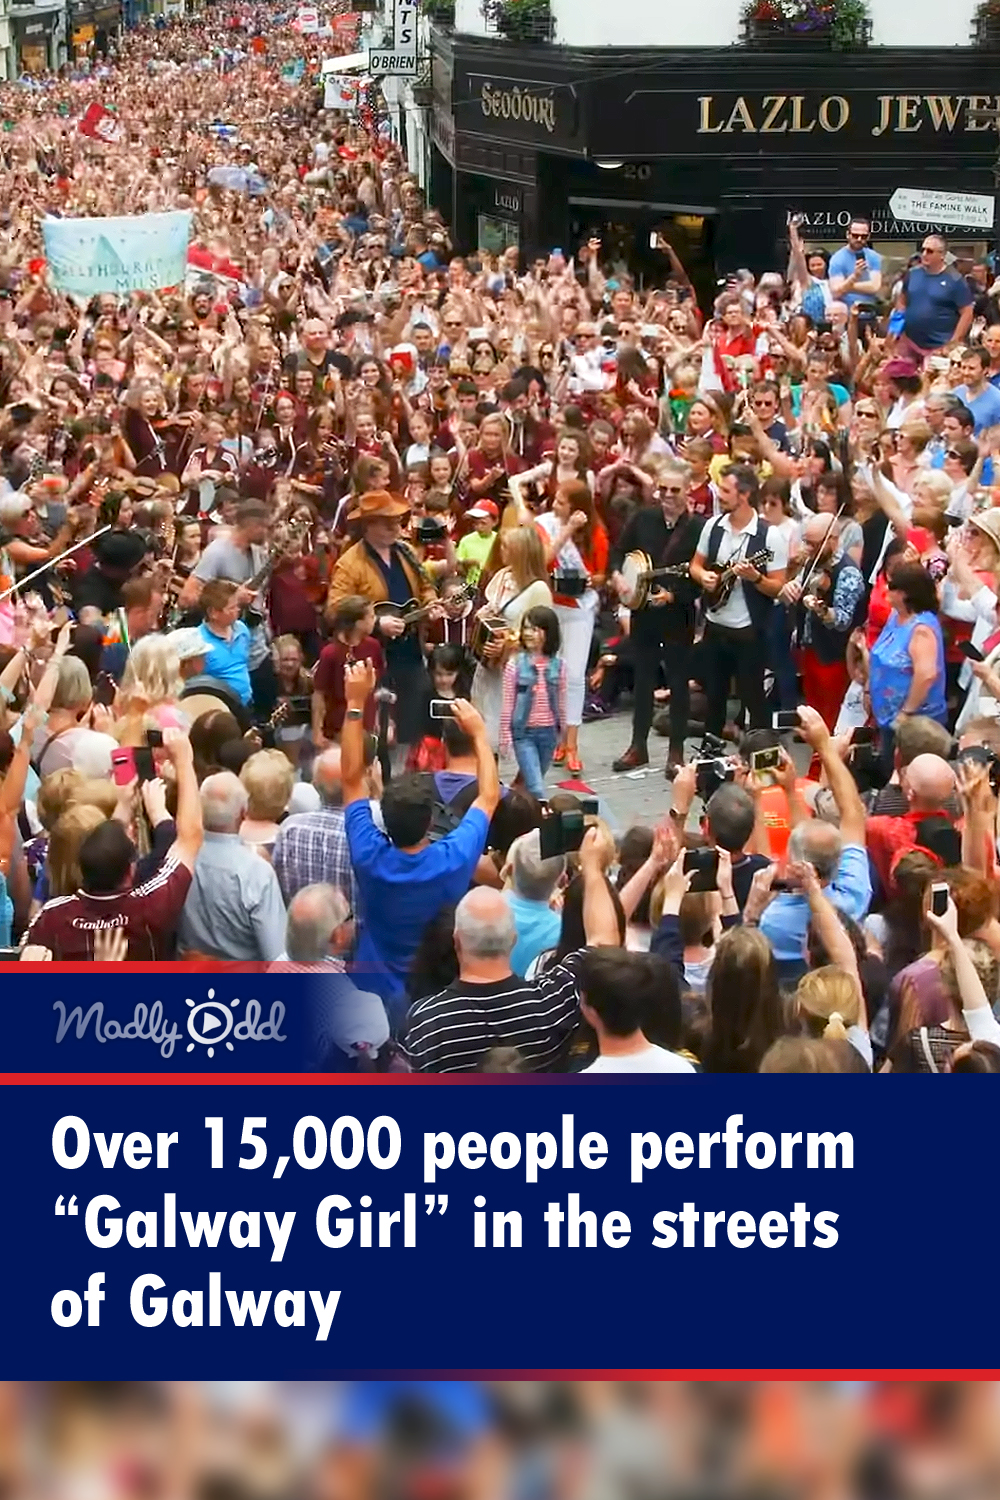 Over 15,000 people perform “Galway Girl” in the streets of Galway